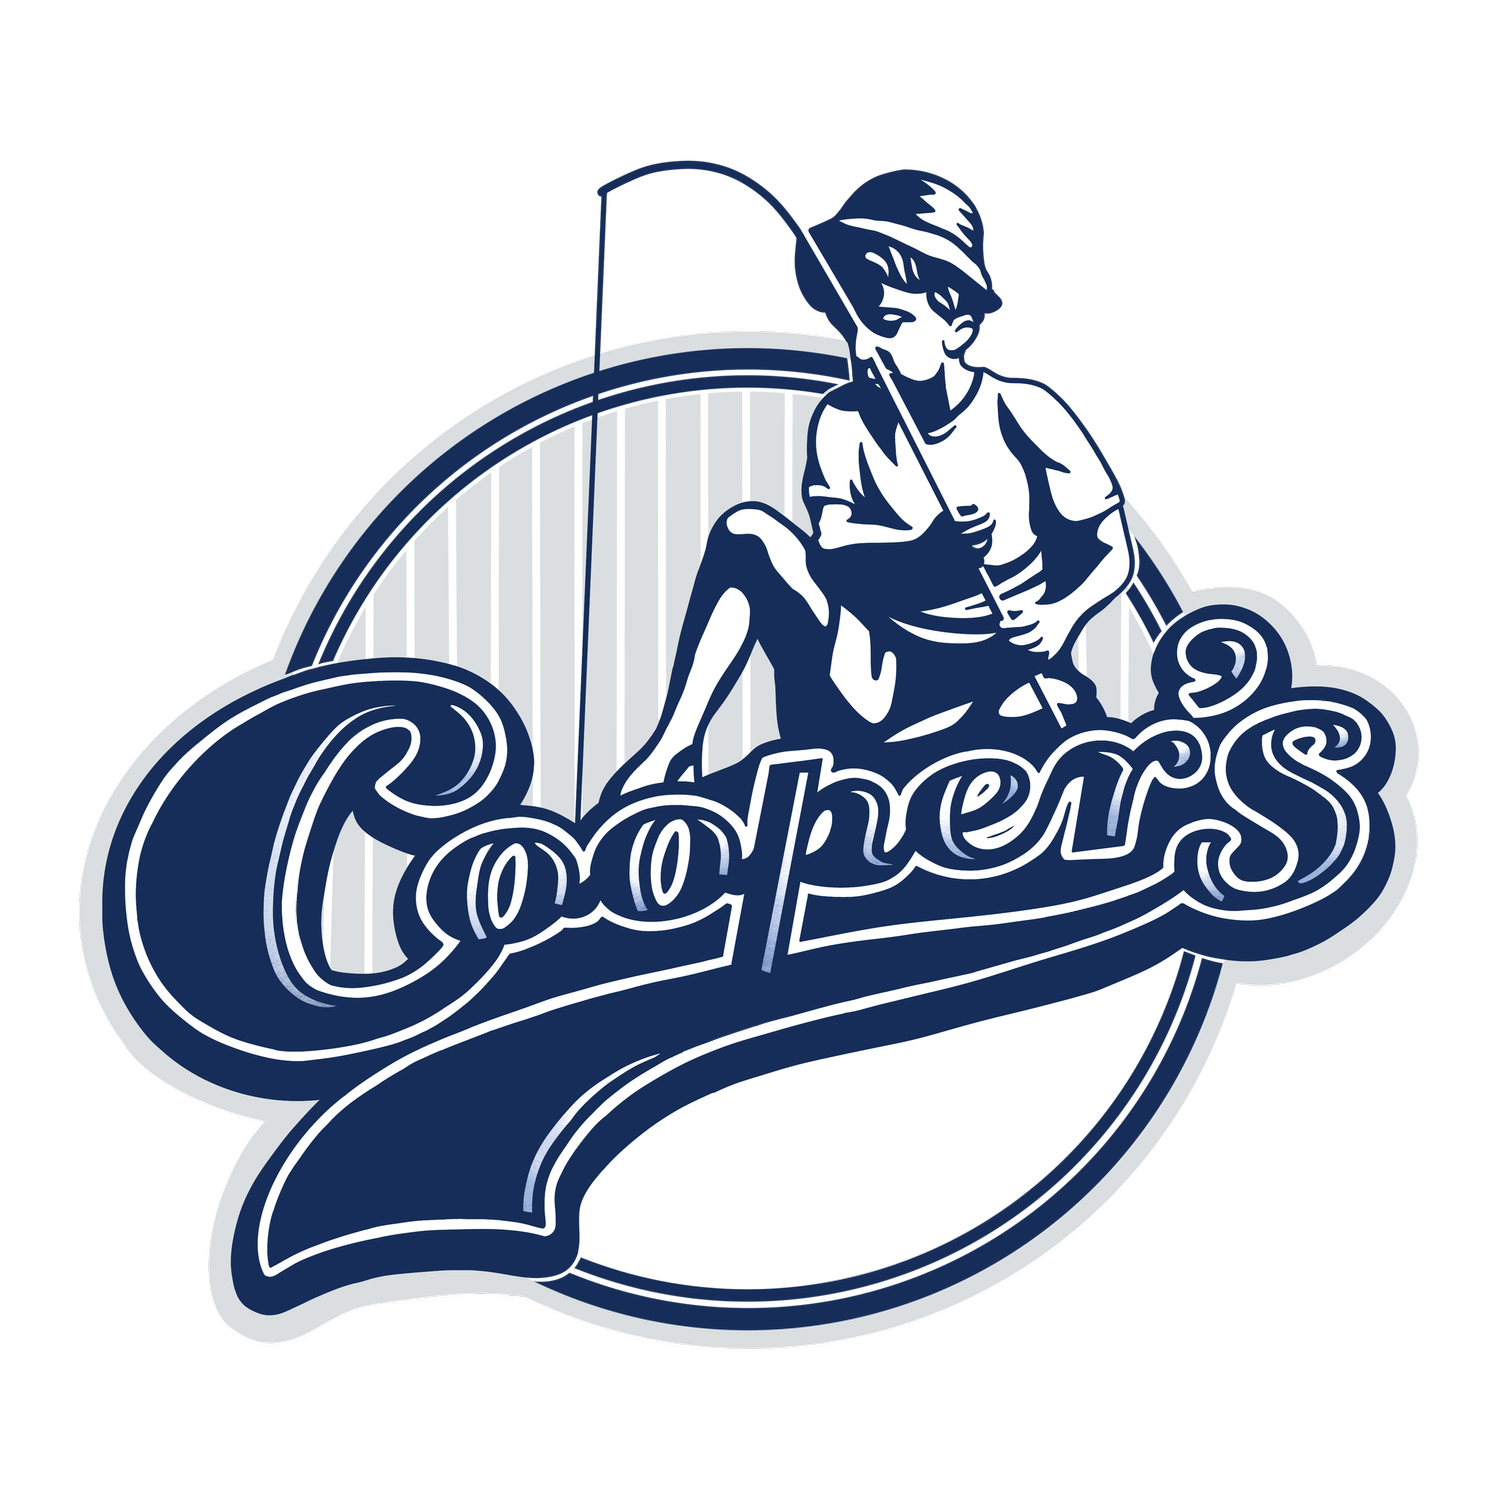 Coopers at Bear Lake West